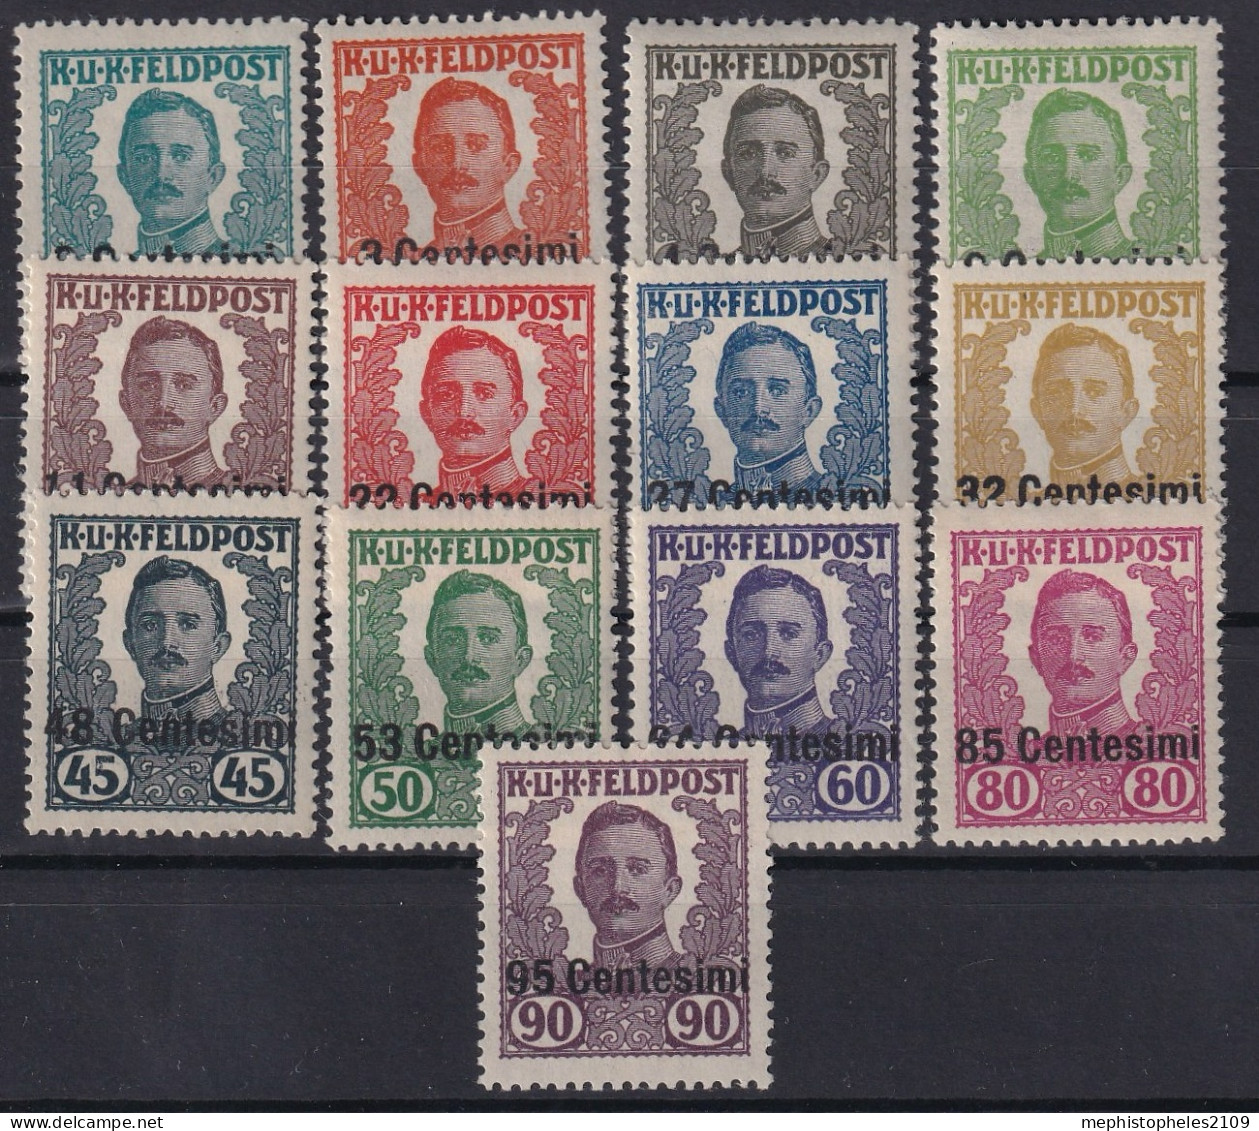 AUSTRIAN OCCUPATION OF ITALY 1918 - MNH - I-XIII - Not Issued! - Unused Stamps